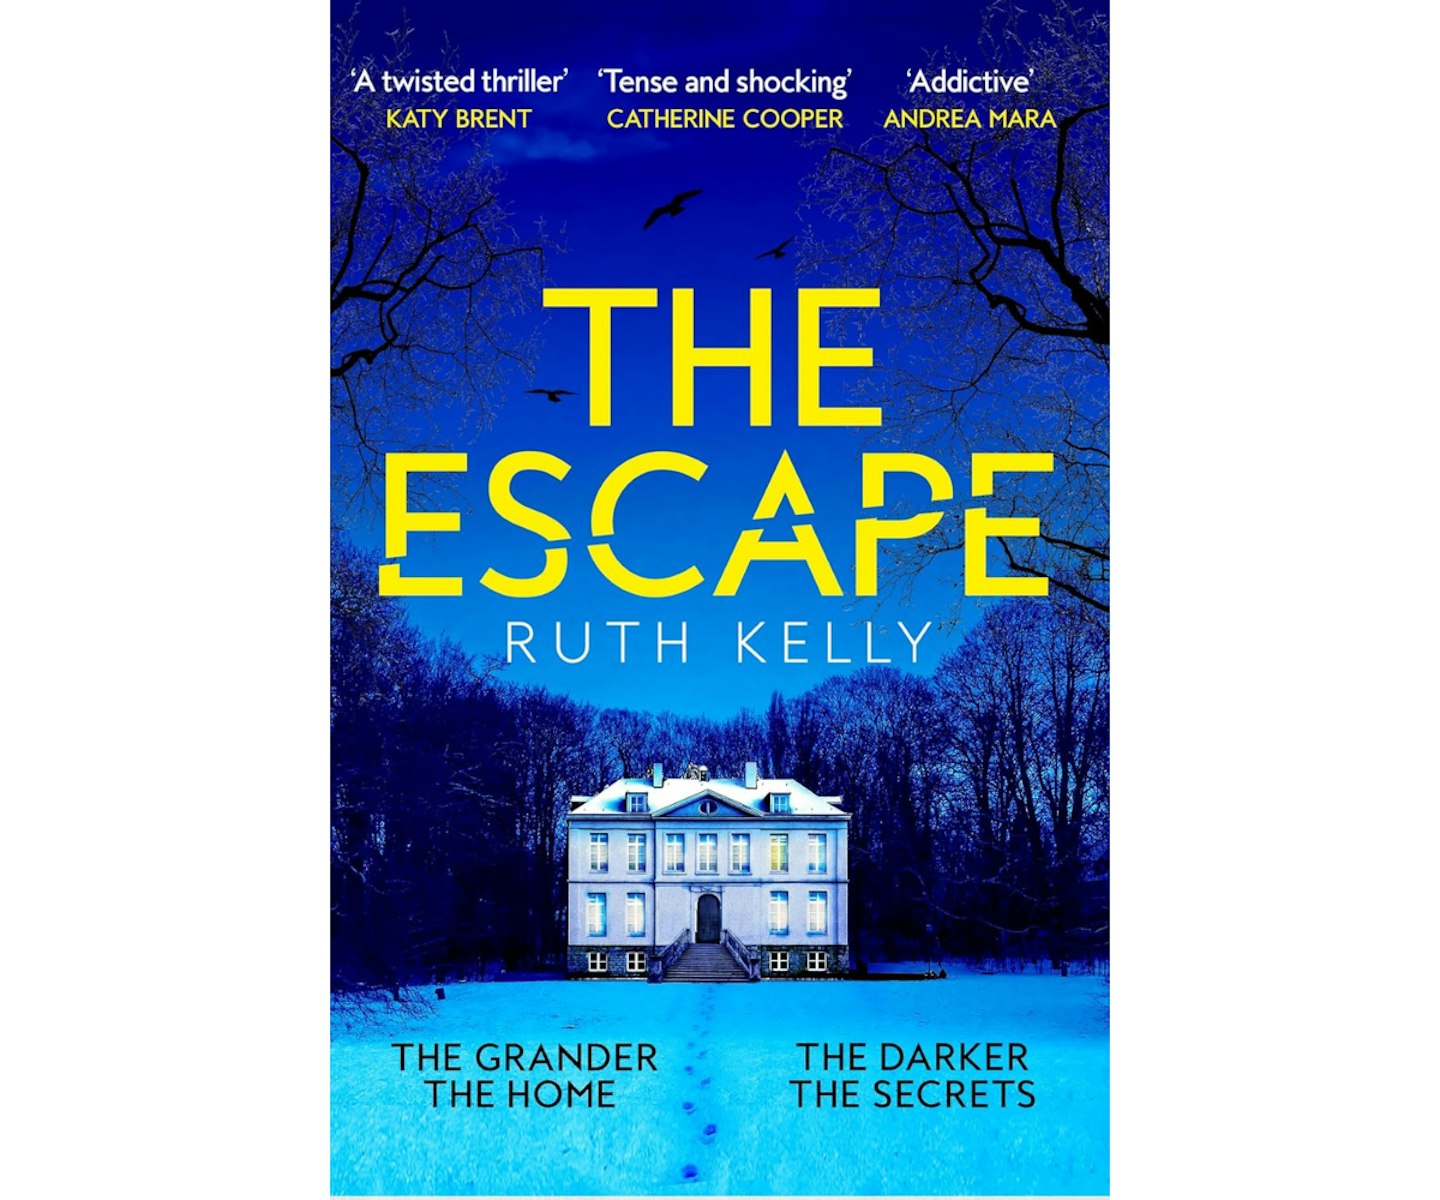 The Escape by Ruth Kelly